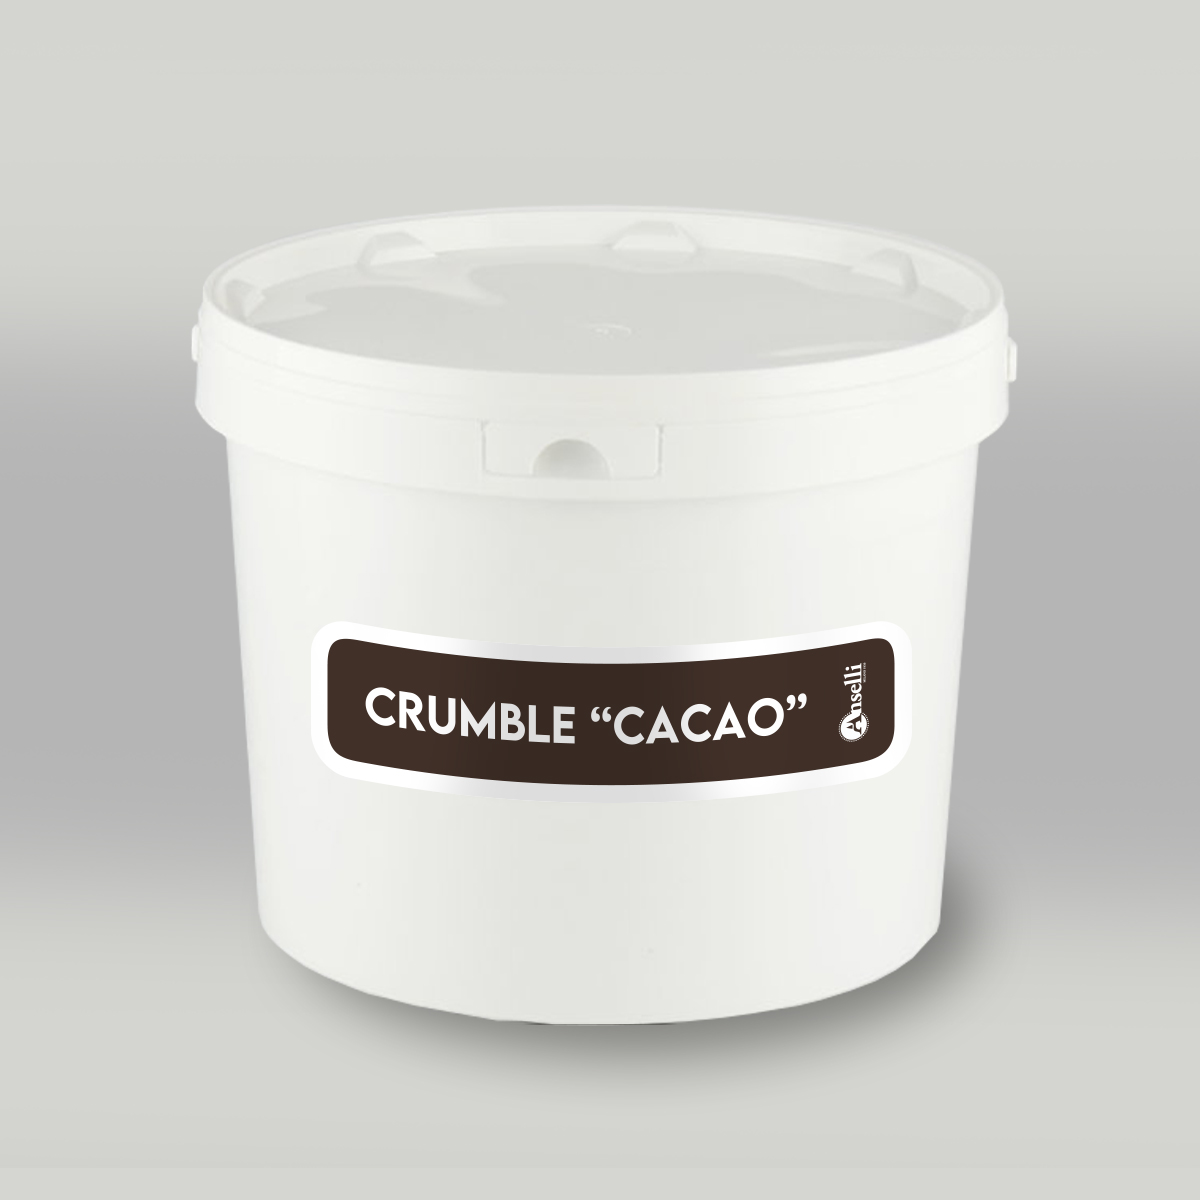 CRUMBLE CACAO